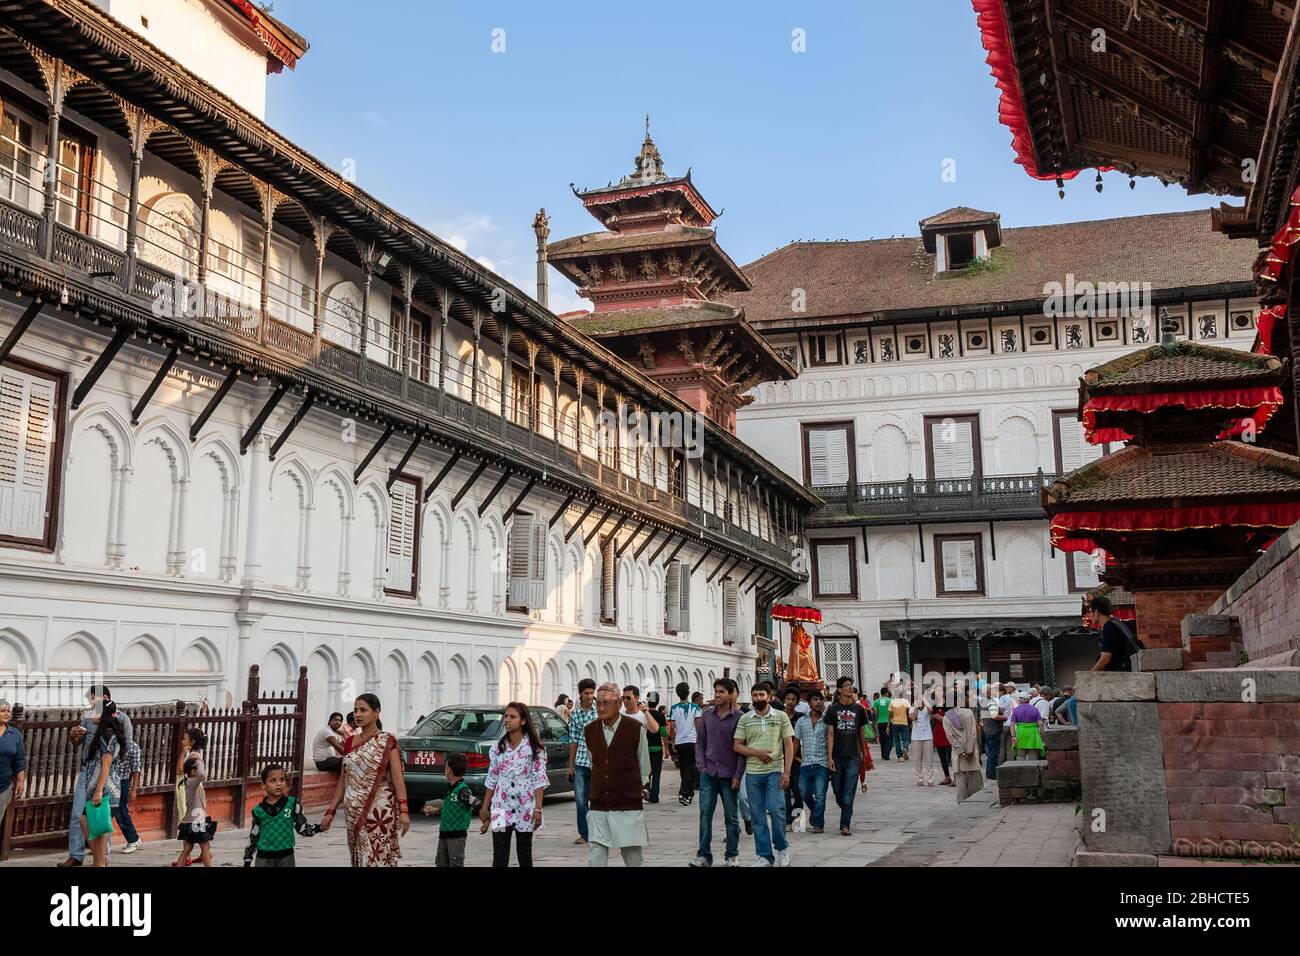 KATHMANDU, NEPAL - SEPTEMBER 29, 2012: locals and tourists walk on Durbar Square. Archive photo before the earthquake Stock Photo